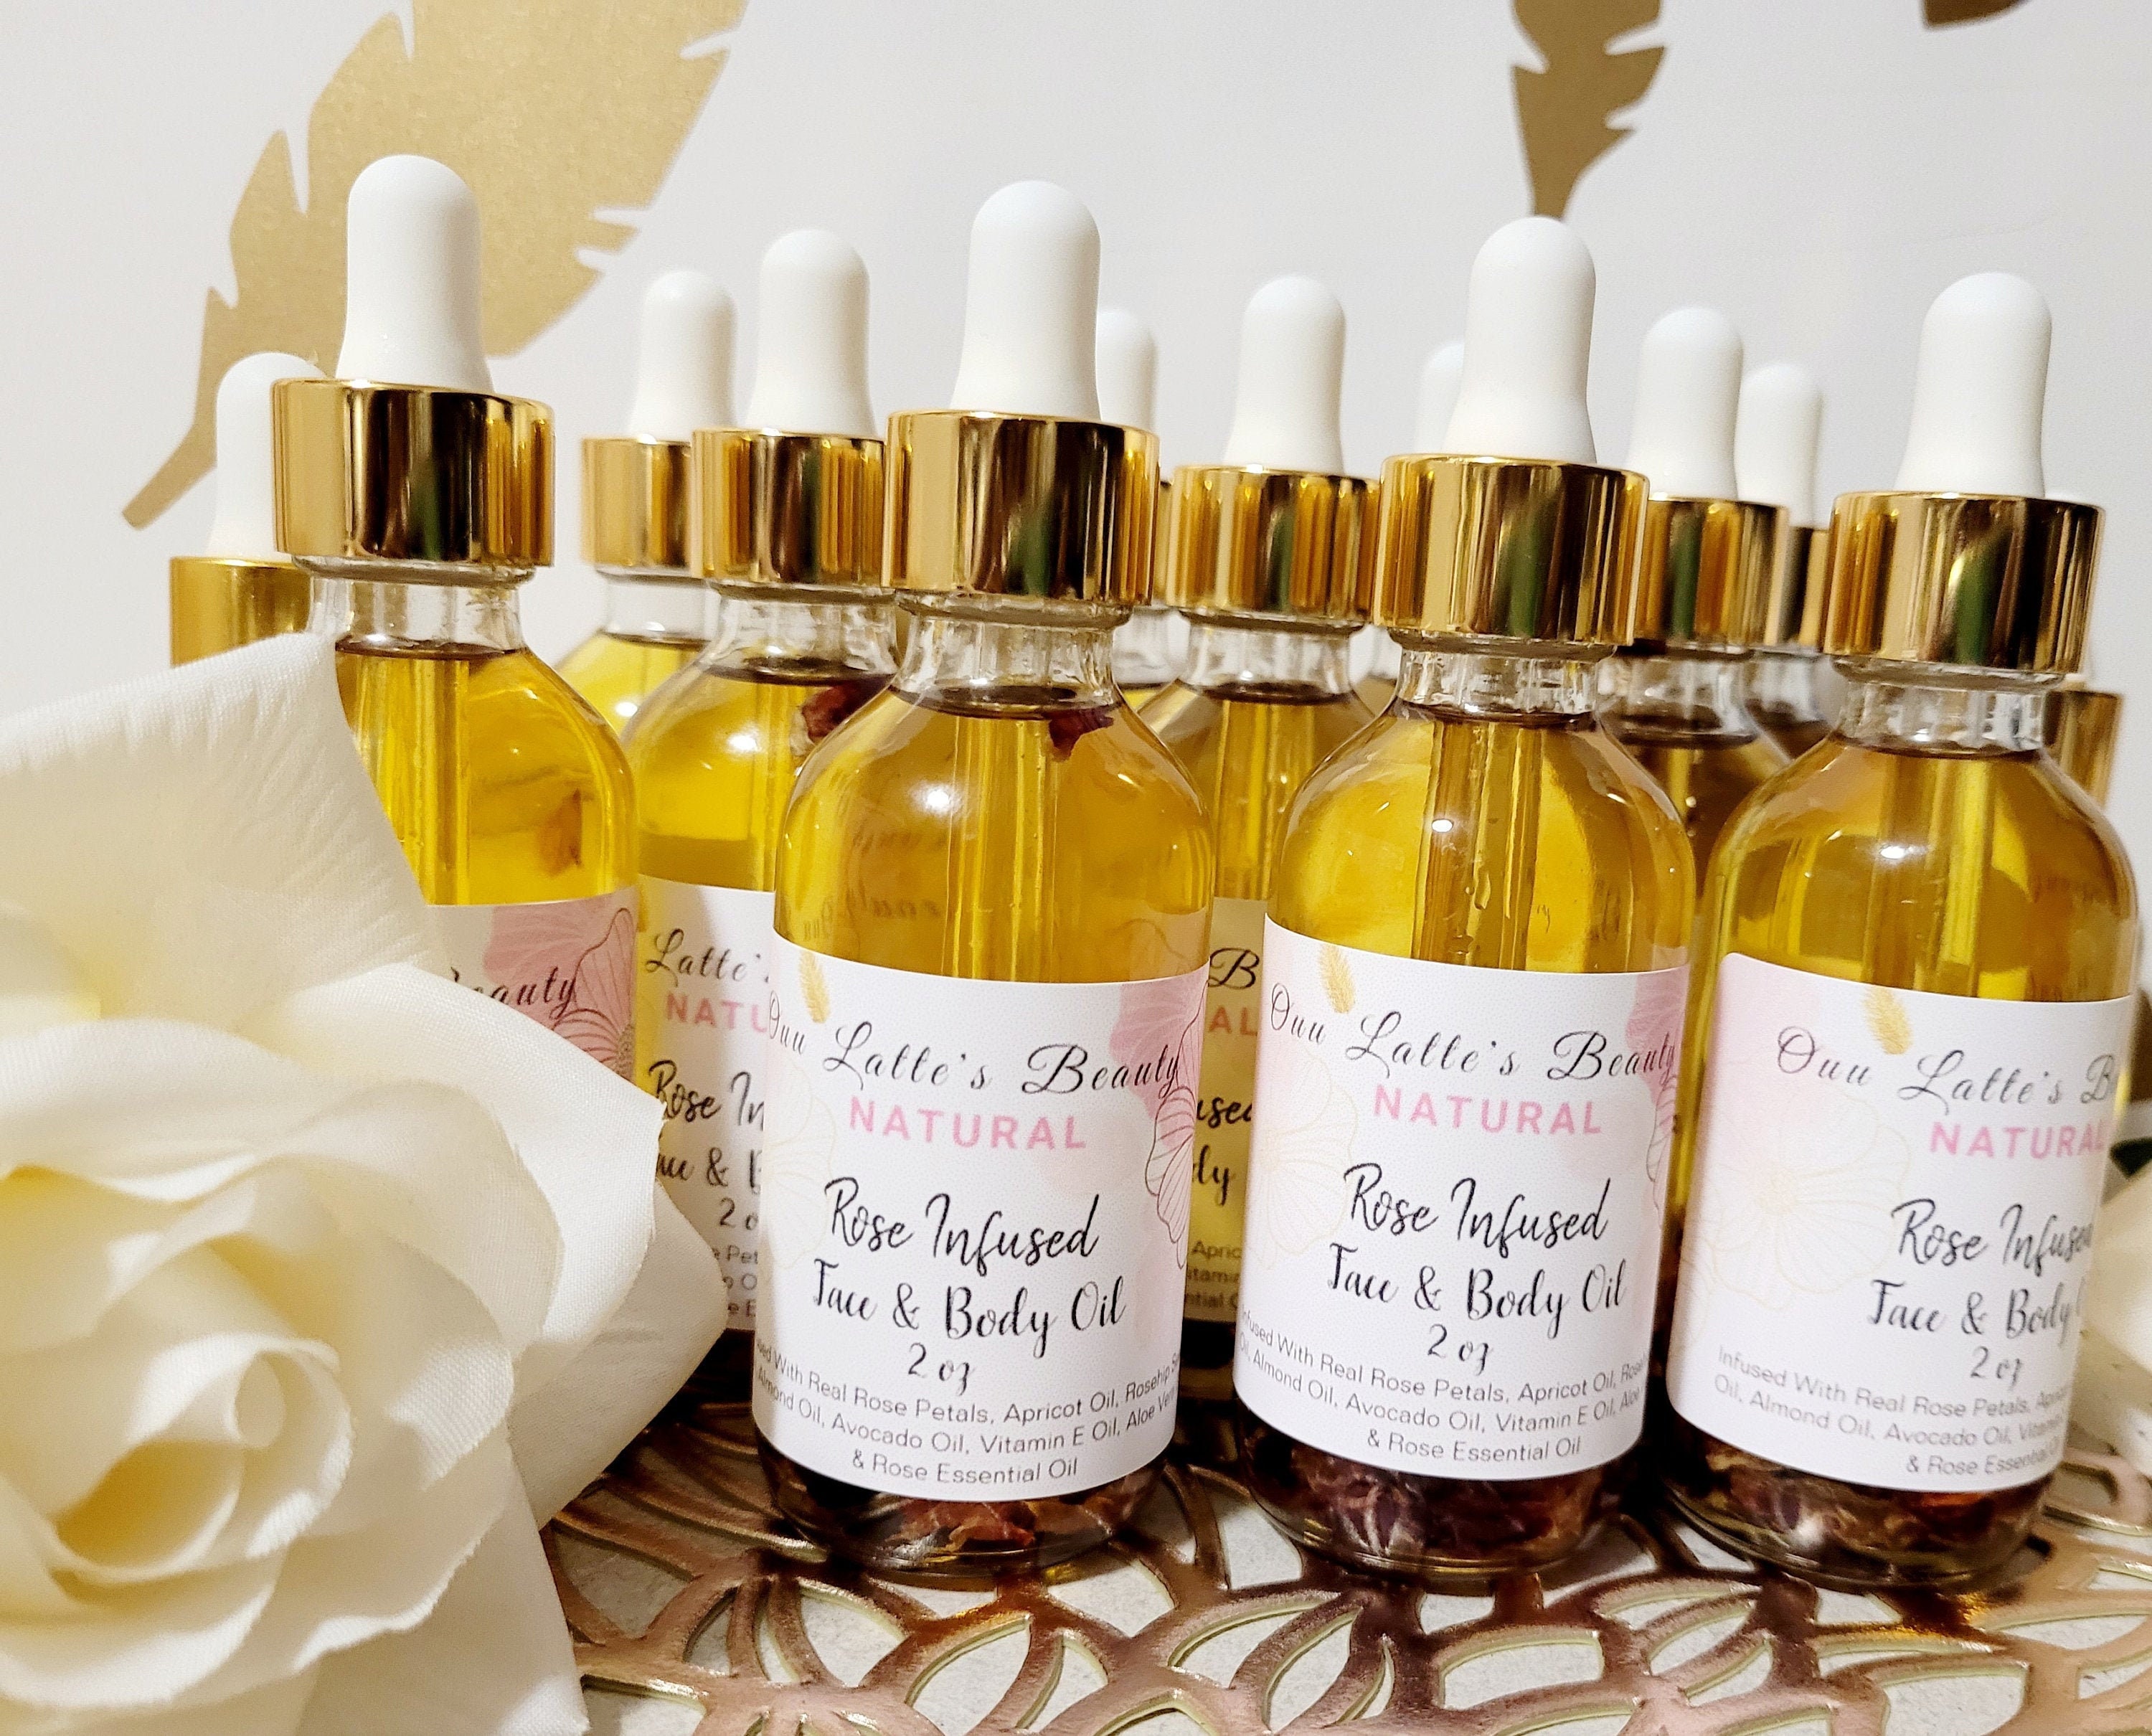 Rose Roll-On Perfume Body Oil - Refreshing Lightly Scented Floral Rose  Petals - Body Oils for Women Perfume - Enriched with Apricot Oil, Sweet  Almond